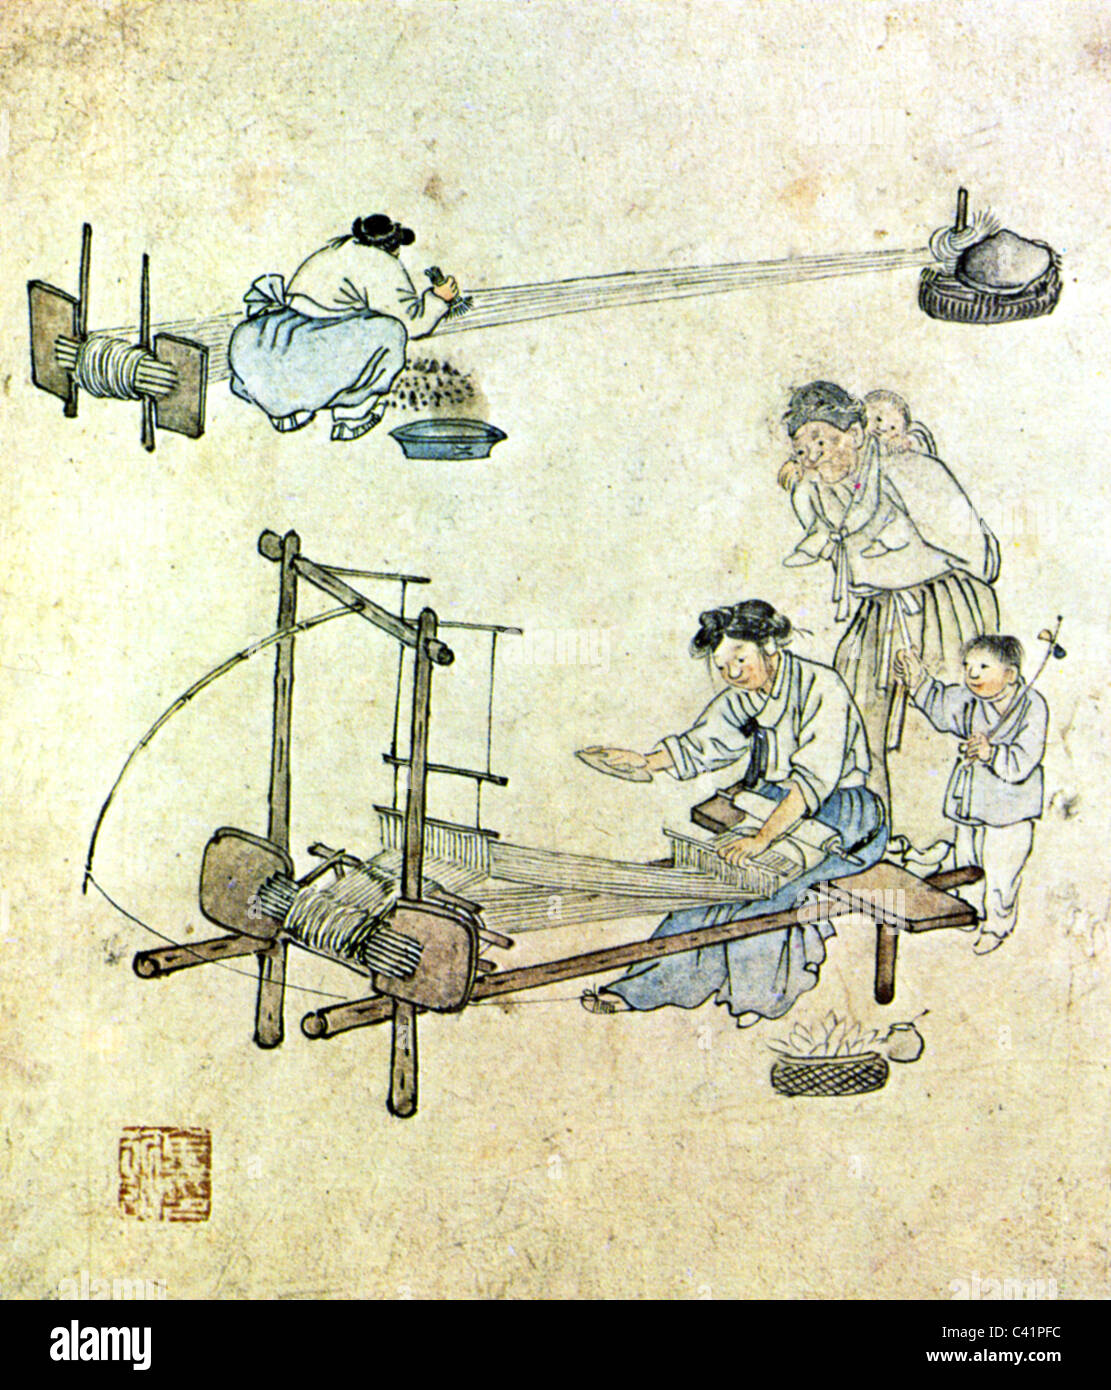 geography / travel, Korea, people, weaver, painting by Kim Hongdo, Joseon Dynasty, late 18th century, professions, handcraft, craftswoman, craftswomen, technics, weaving, loom, textiles, East Asia, Danwon, Yi, historic, historical, Additional-Rights-Clearences-Not Available Stock Photo